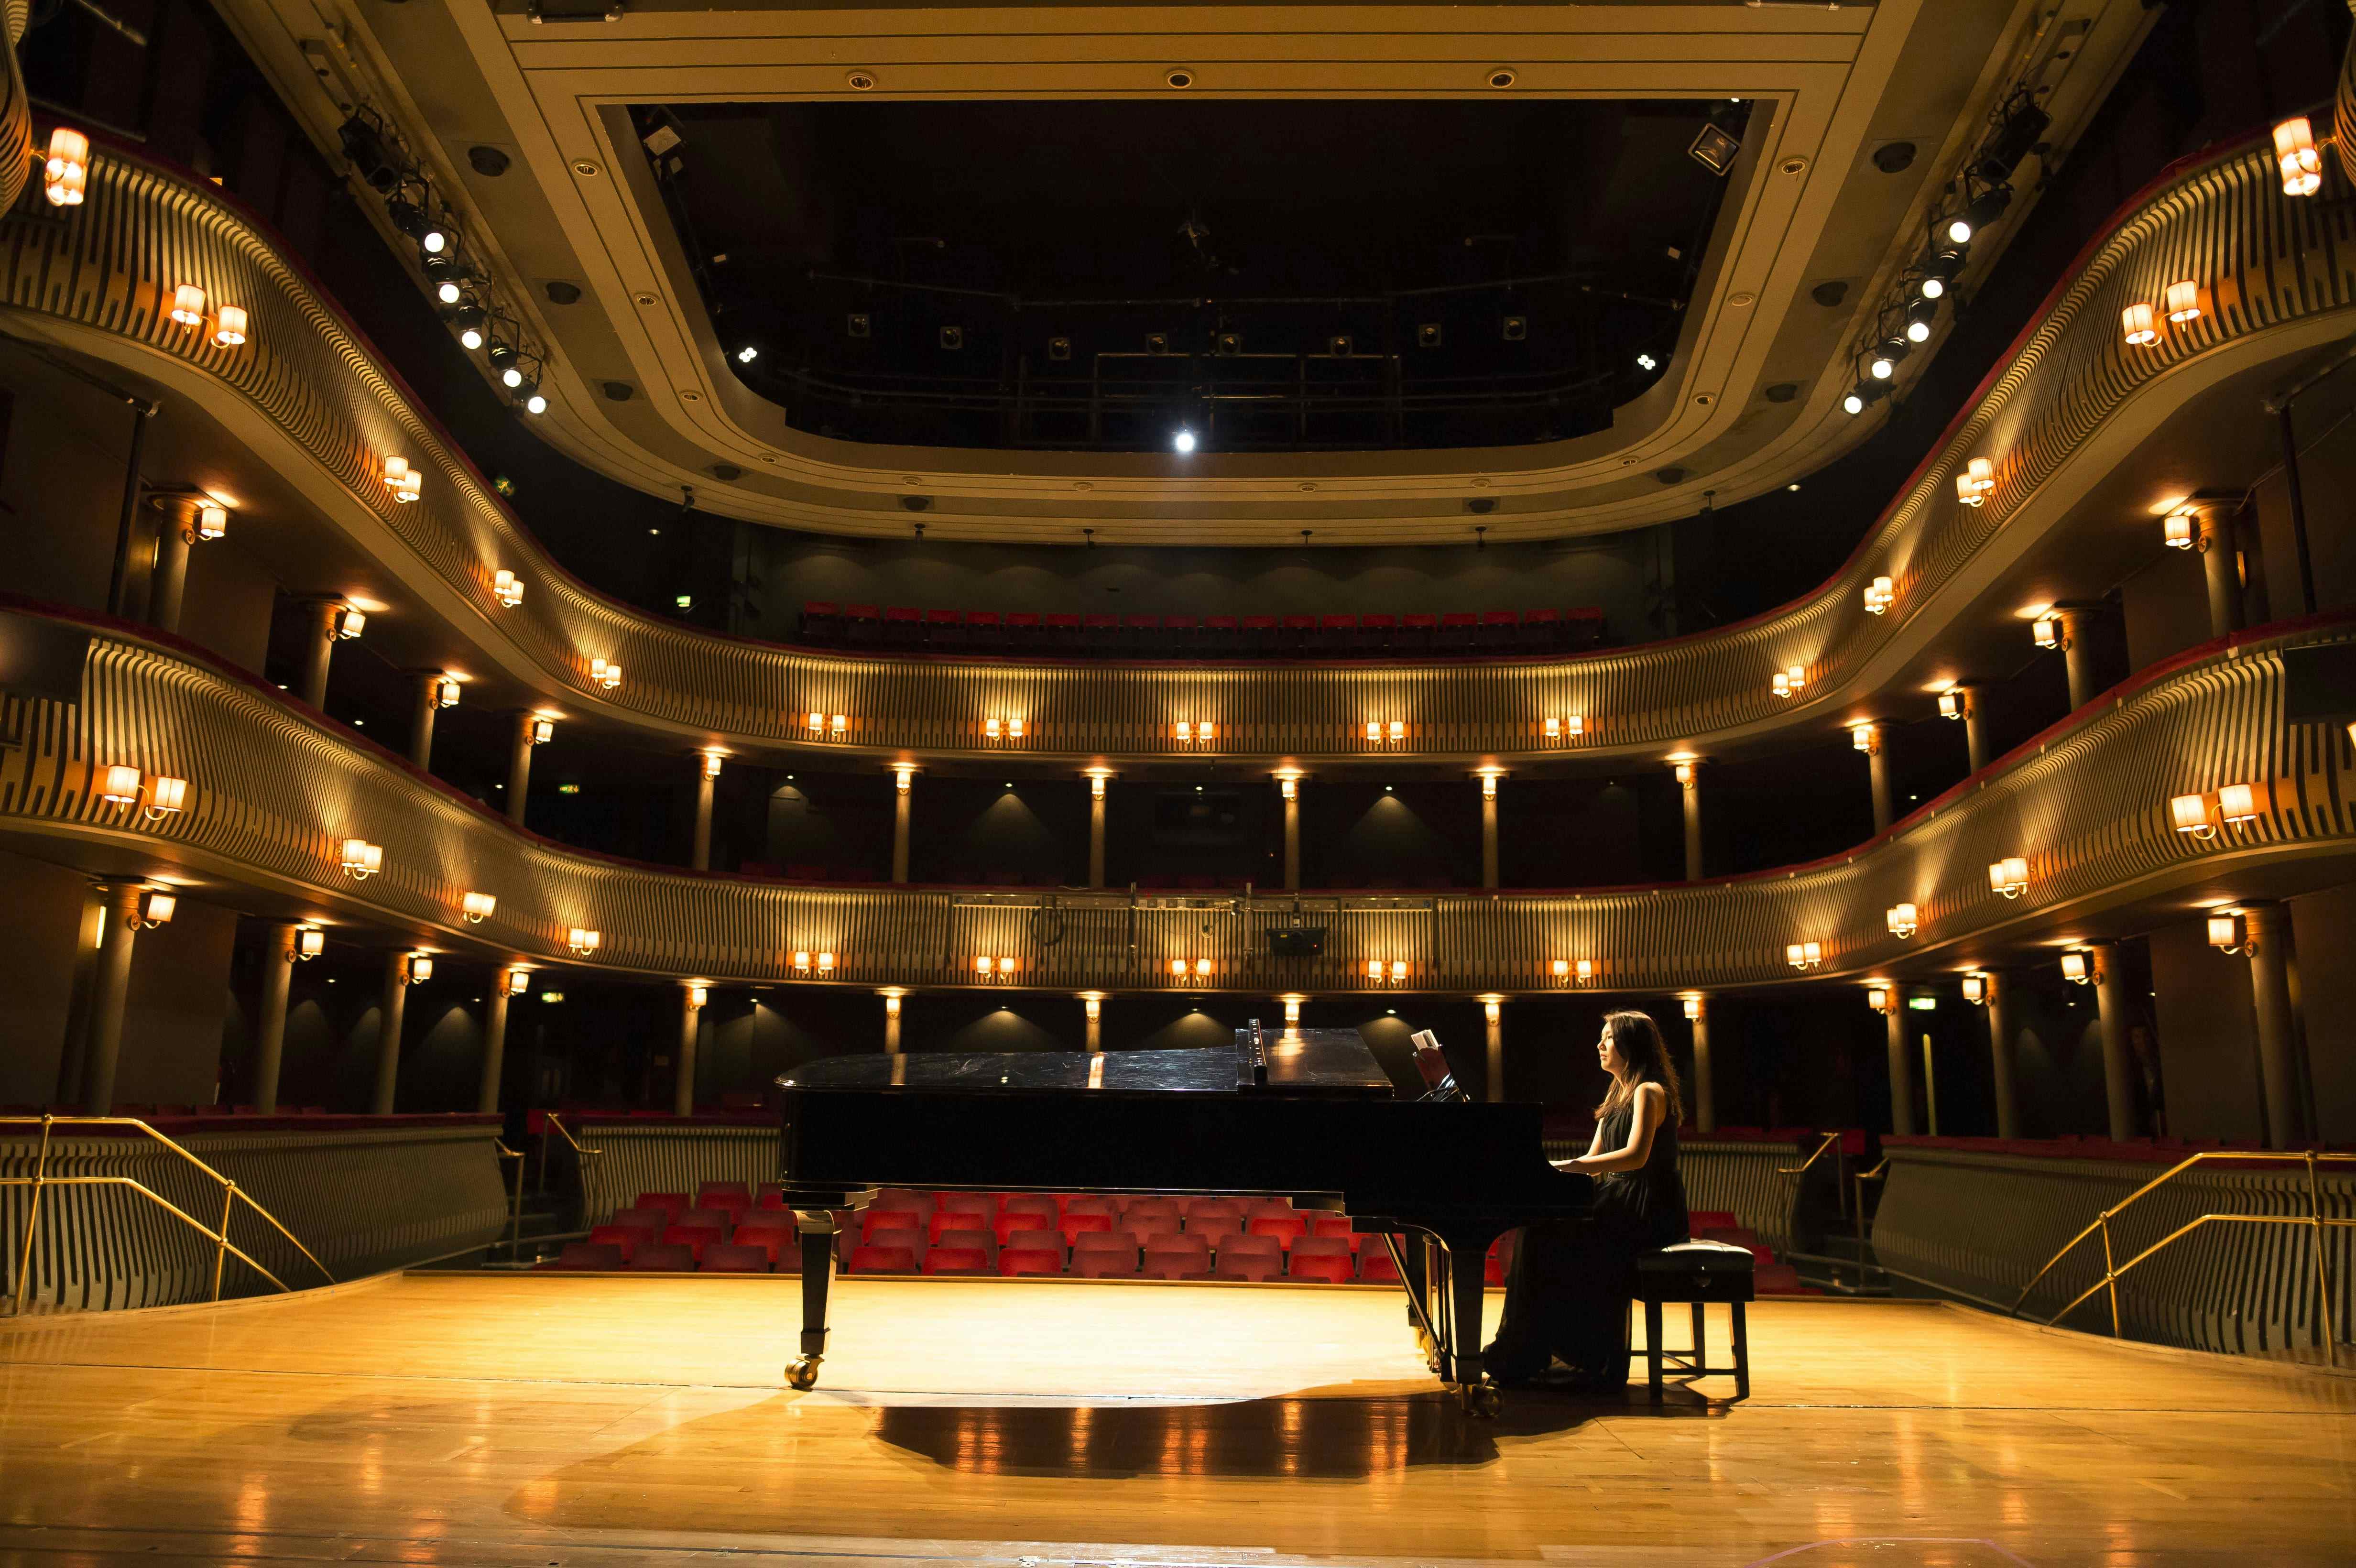 Britten Theatre, The Royal College of Music